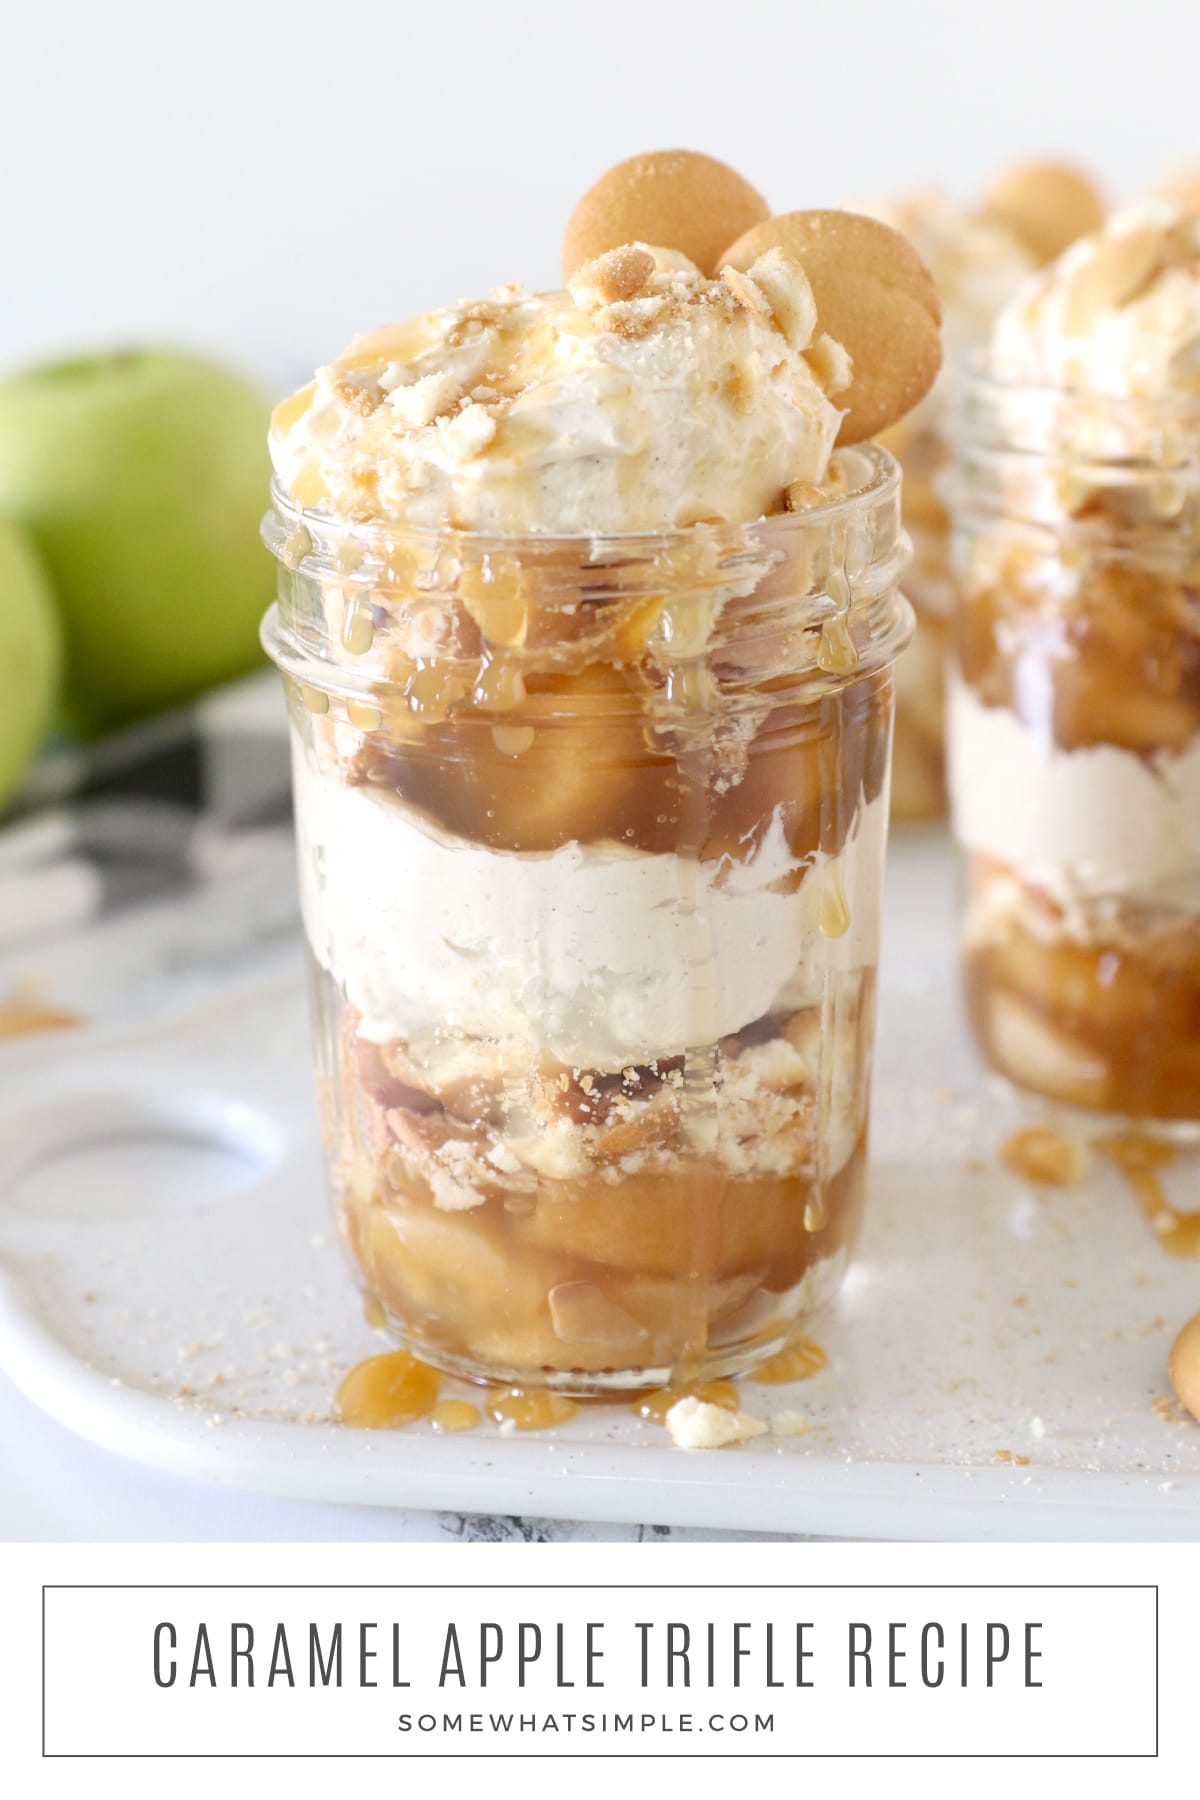 Caramel Apple Trifle is a no-bake cheesecake dessert with rich layers that are creamy, crunchy, tart, and delicious! It's the perfect decadent dessert to feed your guests! via @somewhatsimple